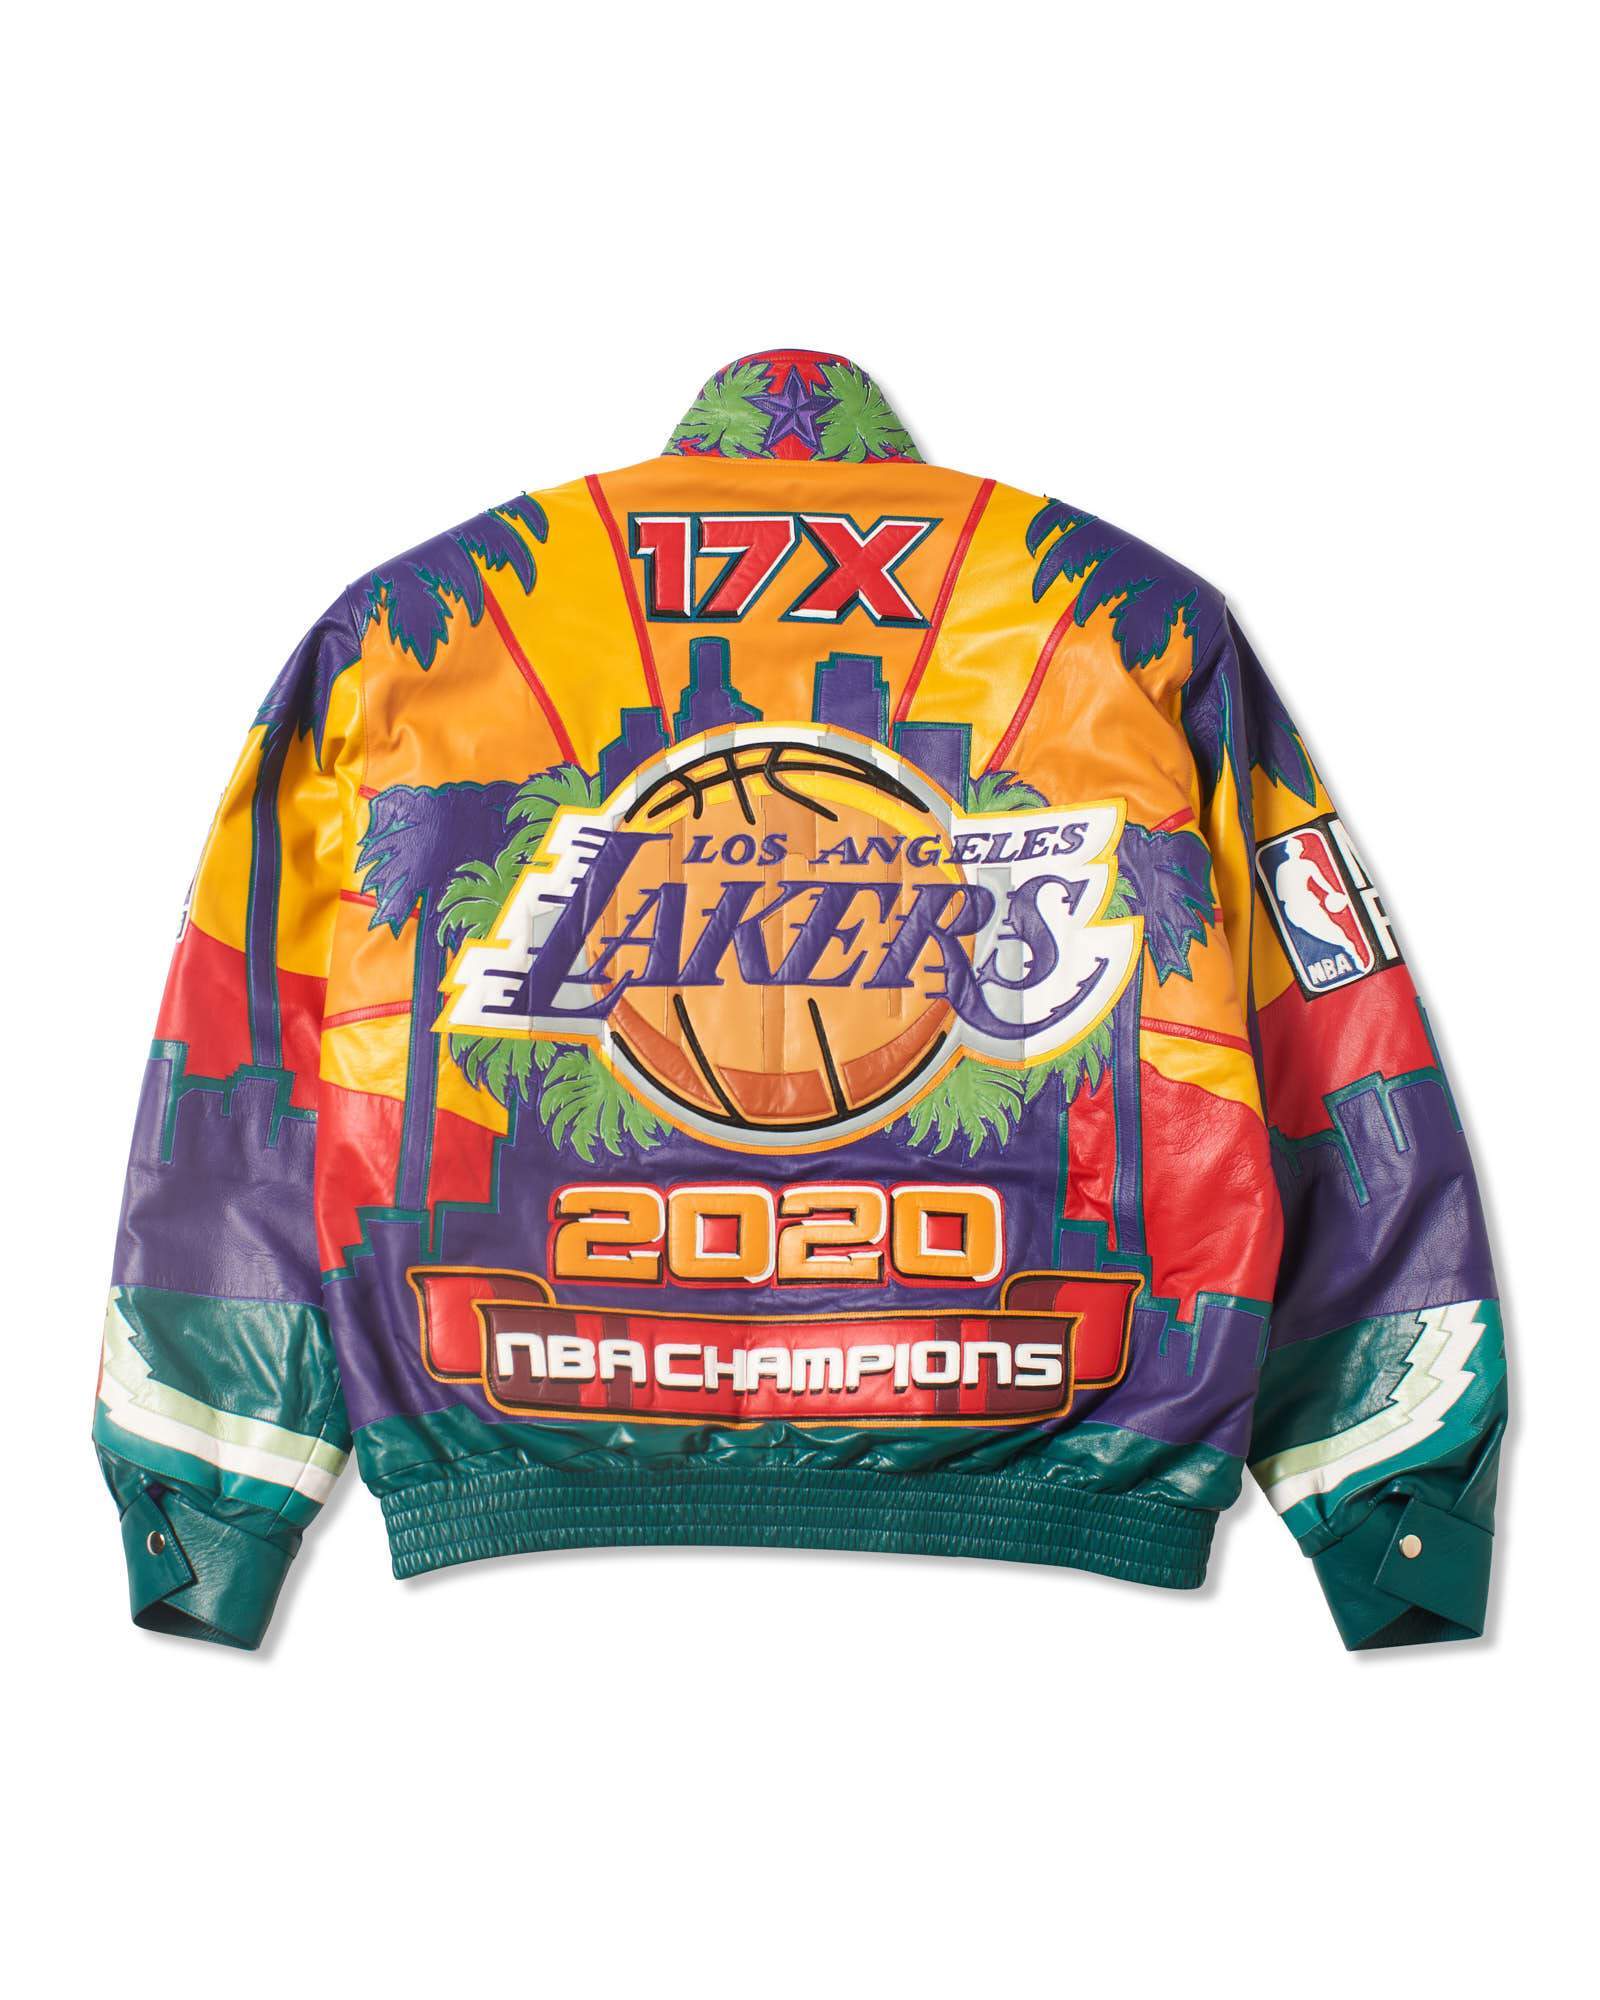 NBA Store - The Los Angeles Lakers are the 2020 NBA